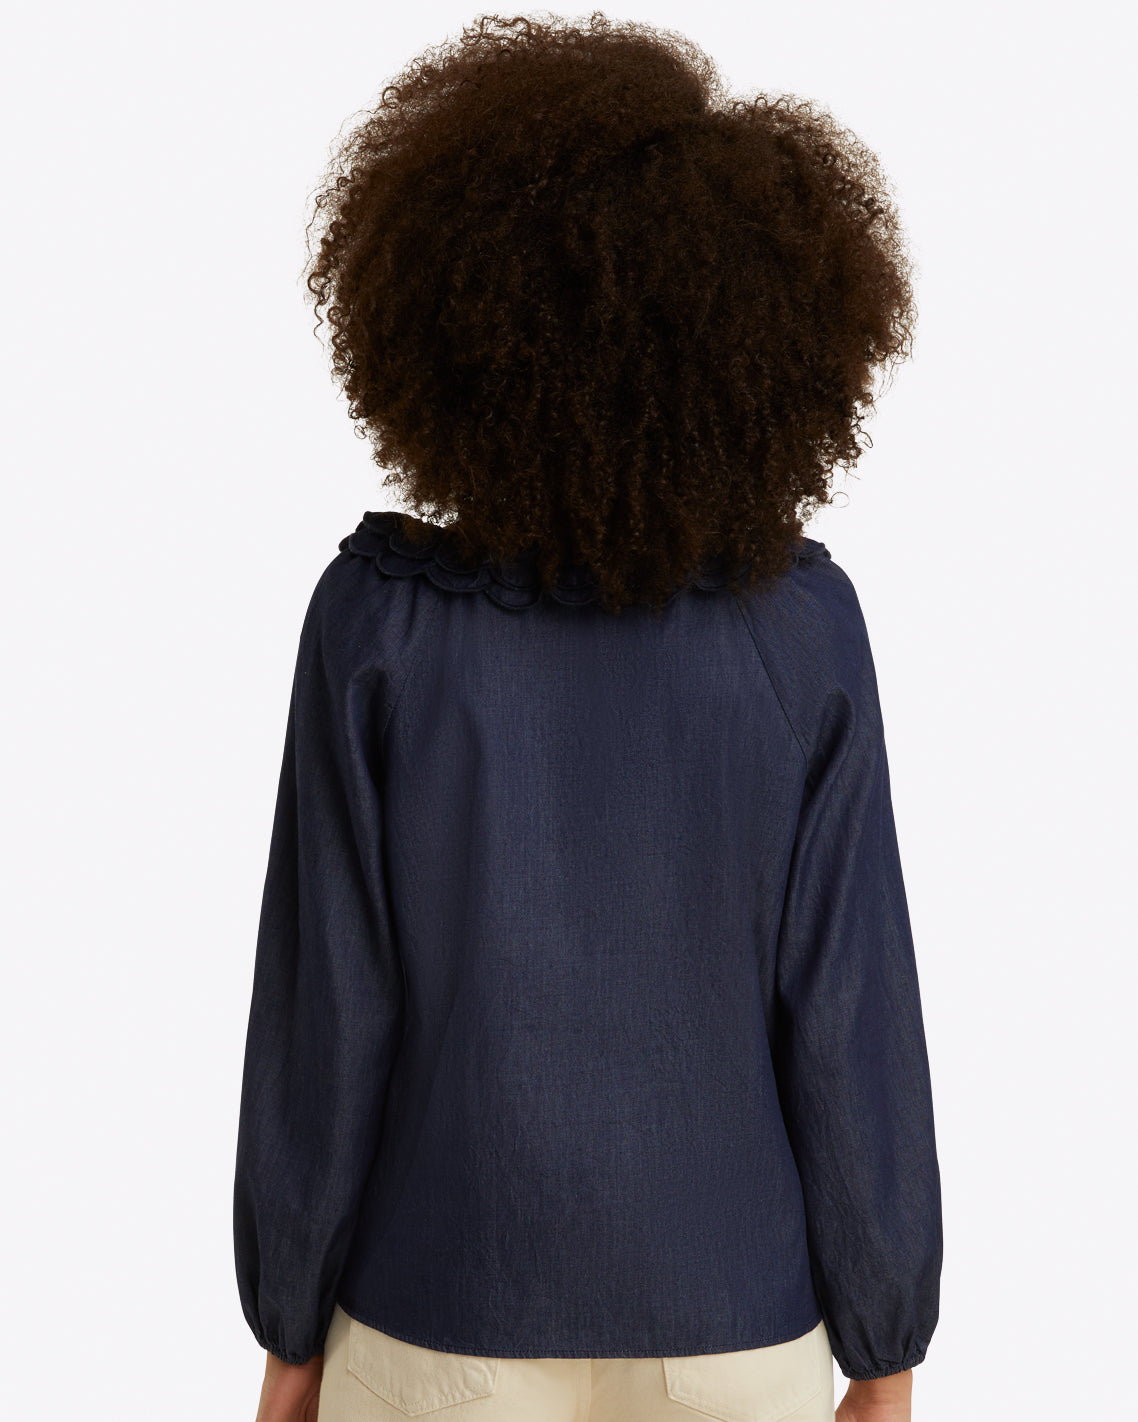 Reyna Long-Sleeve Top in Chambray